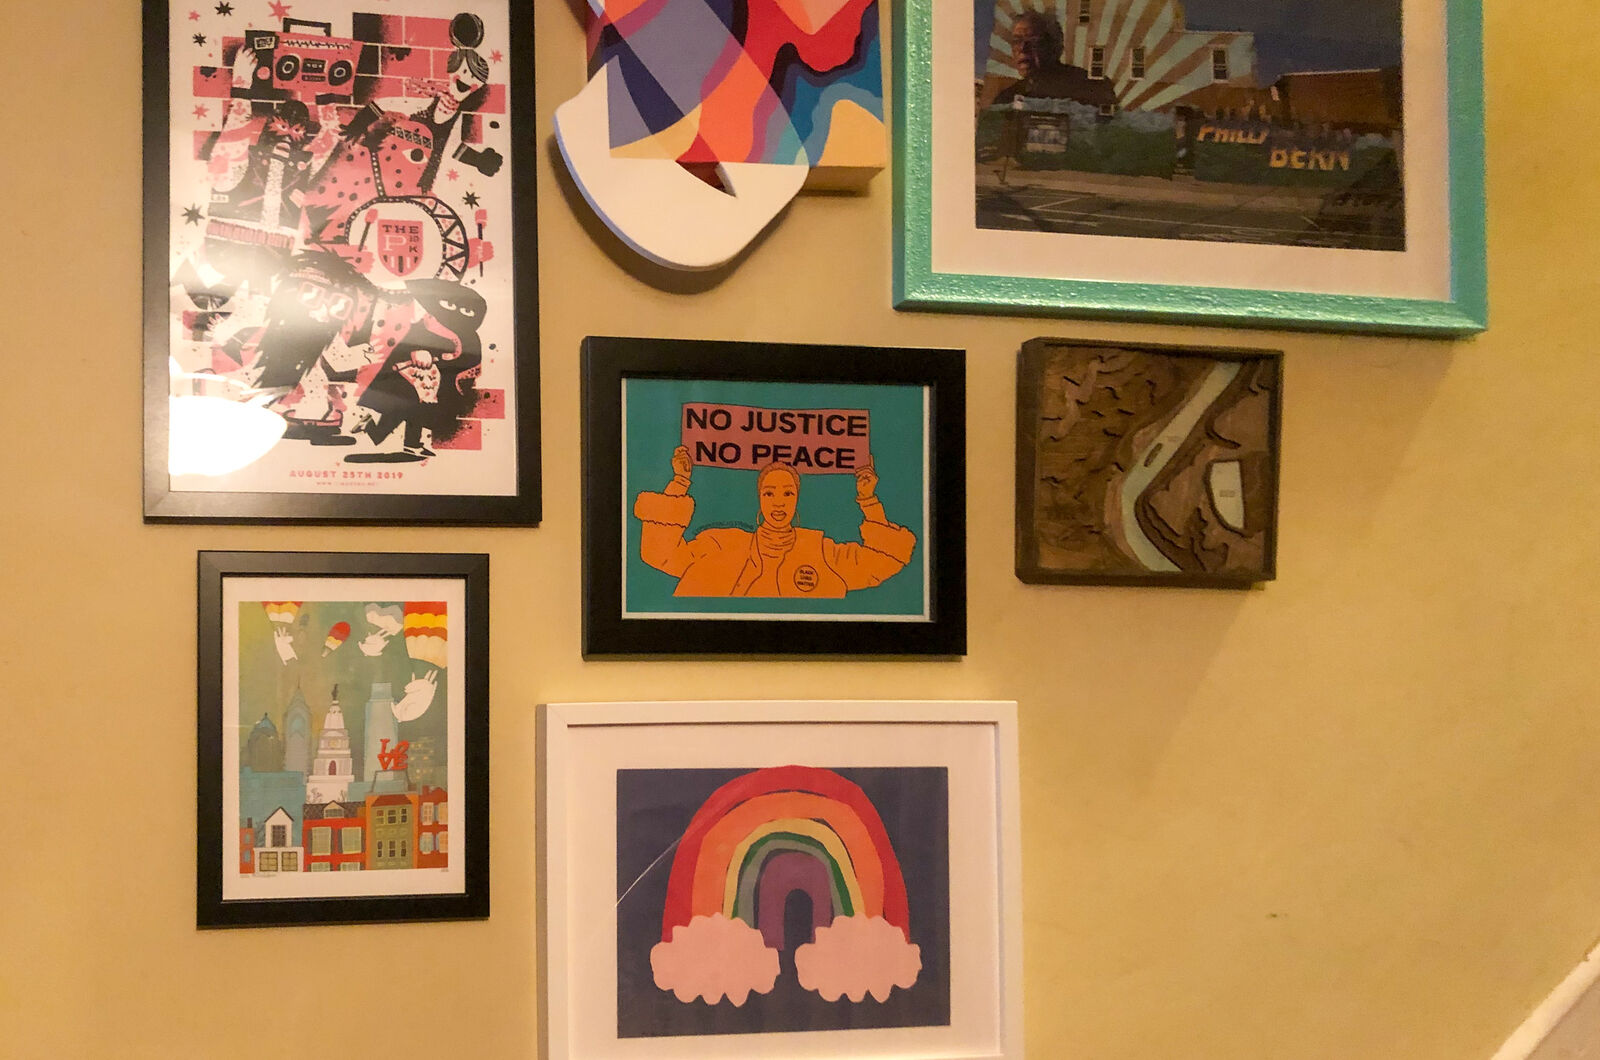 rainbow made of cut paper hangs on the wall with other framed art